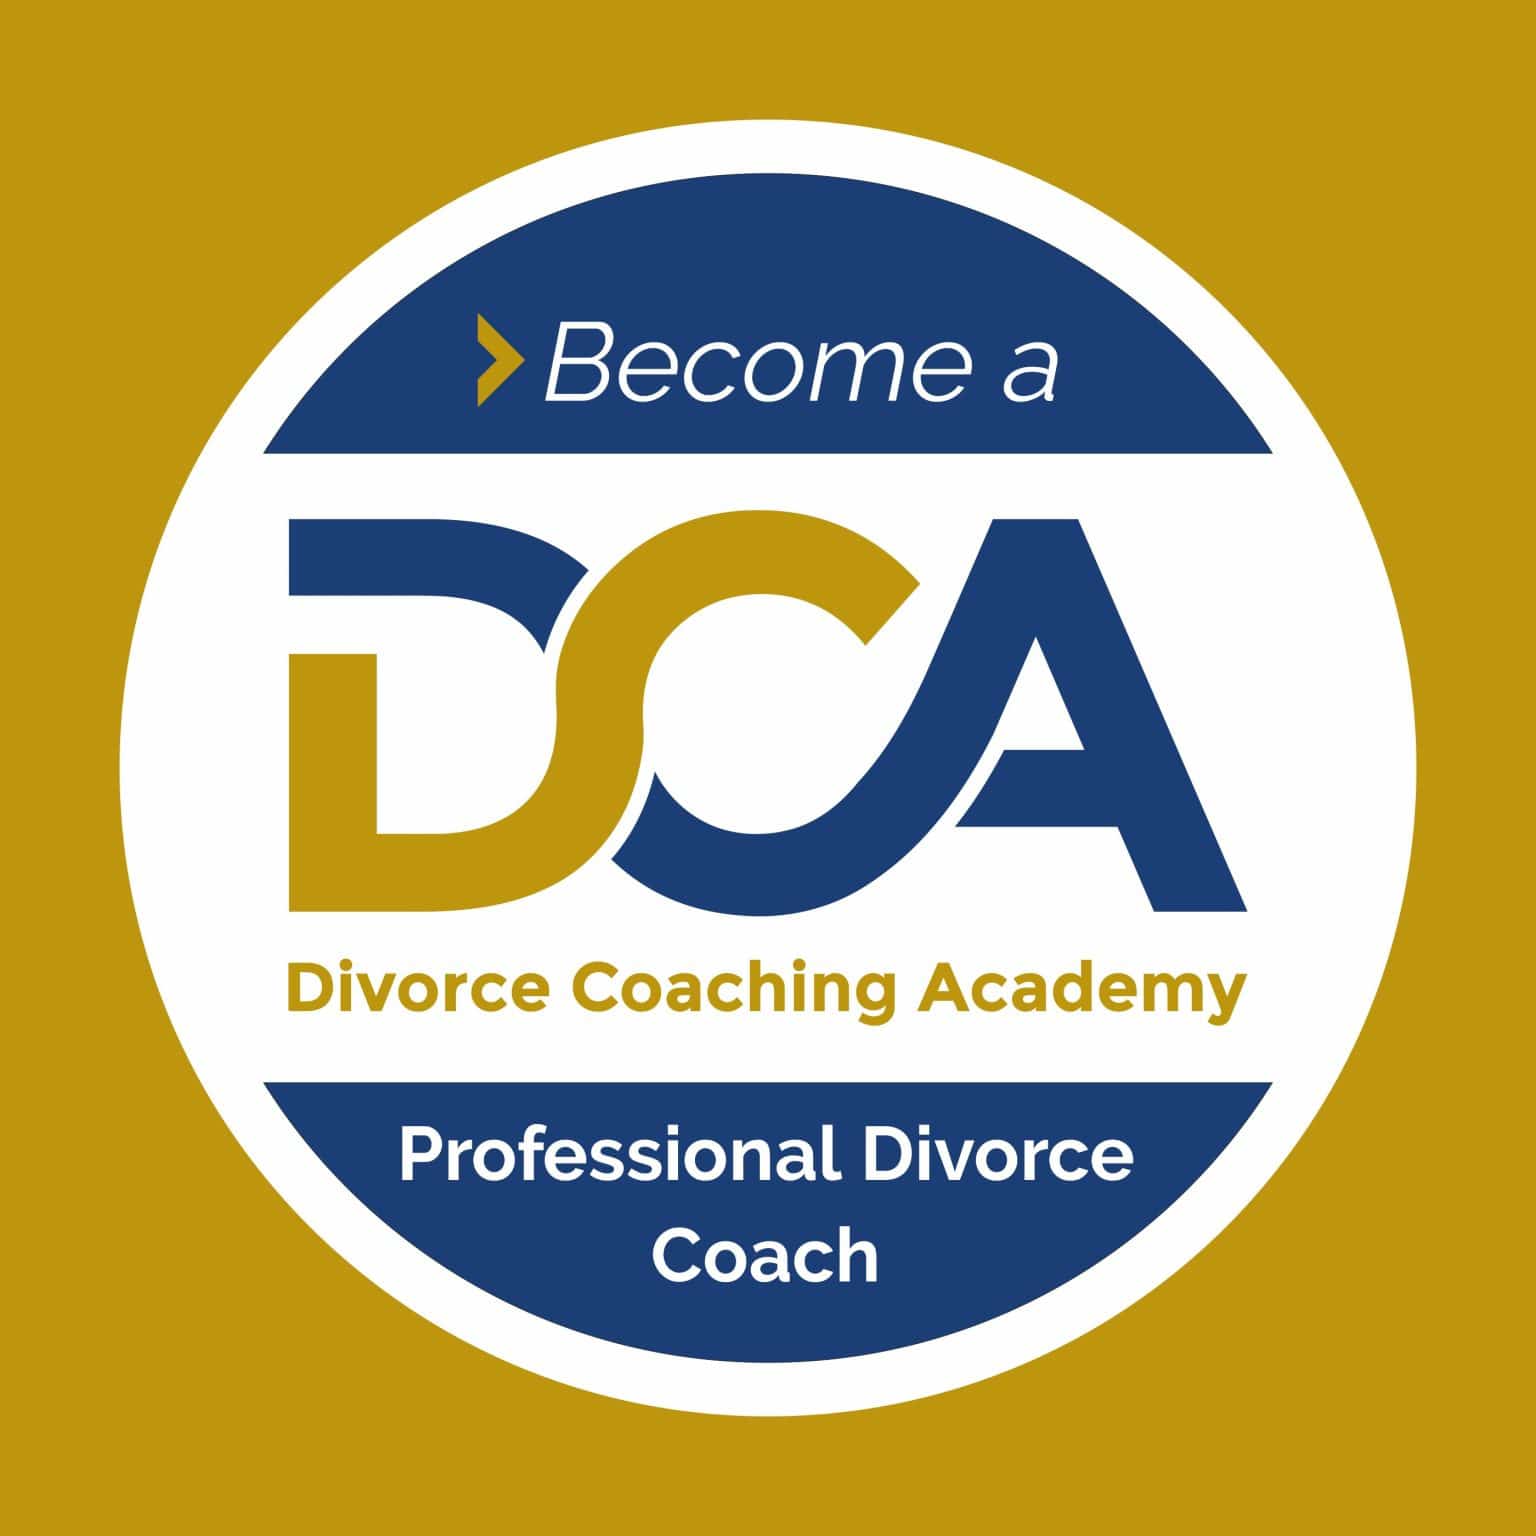 The Divorce Coaching Academy Get a Diploma in Professional Divorce